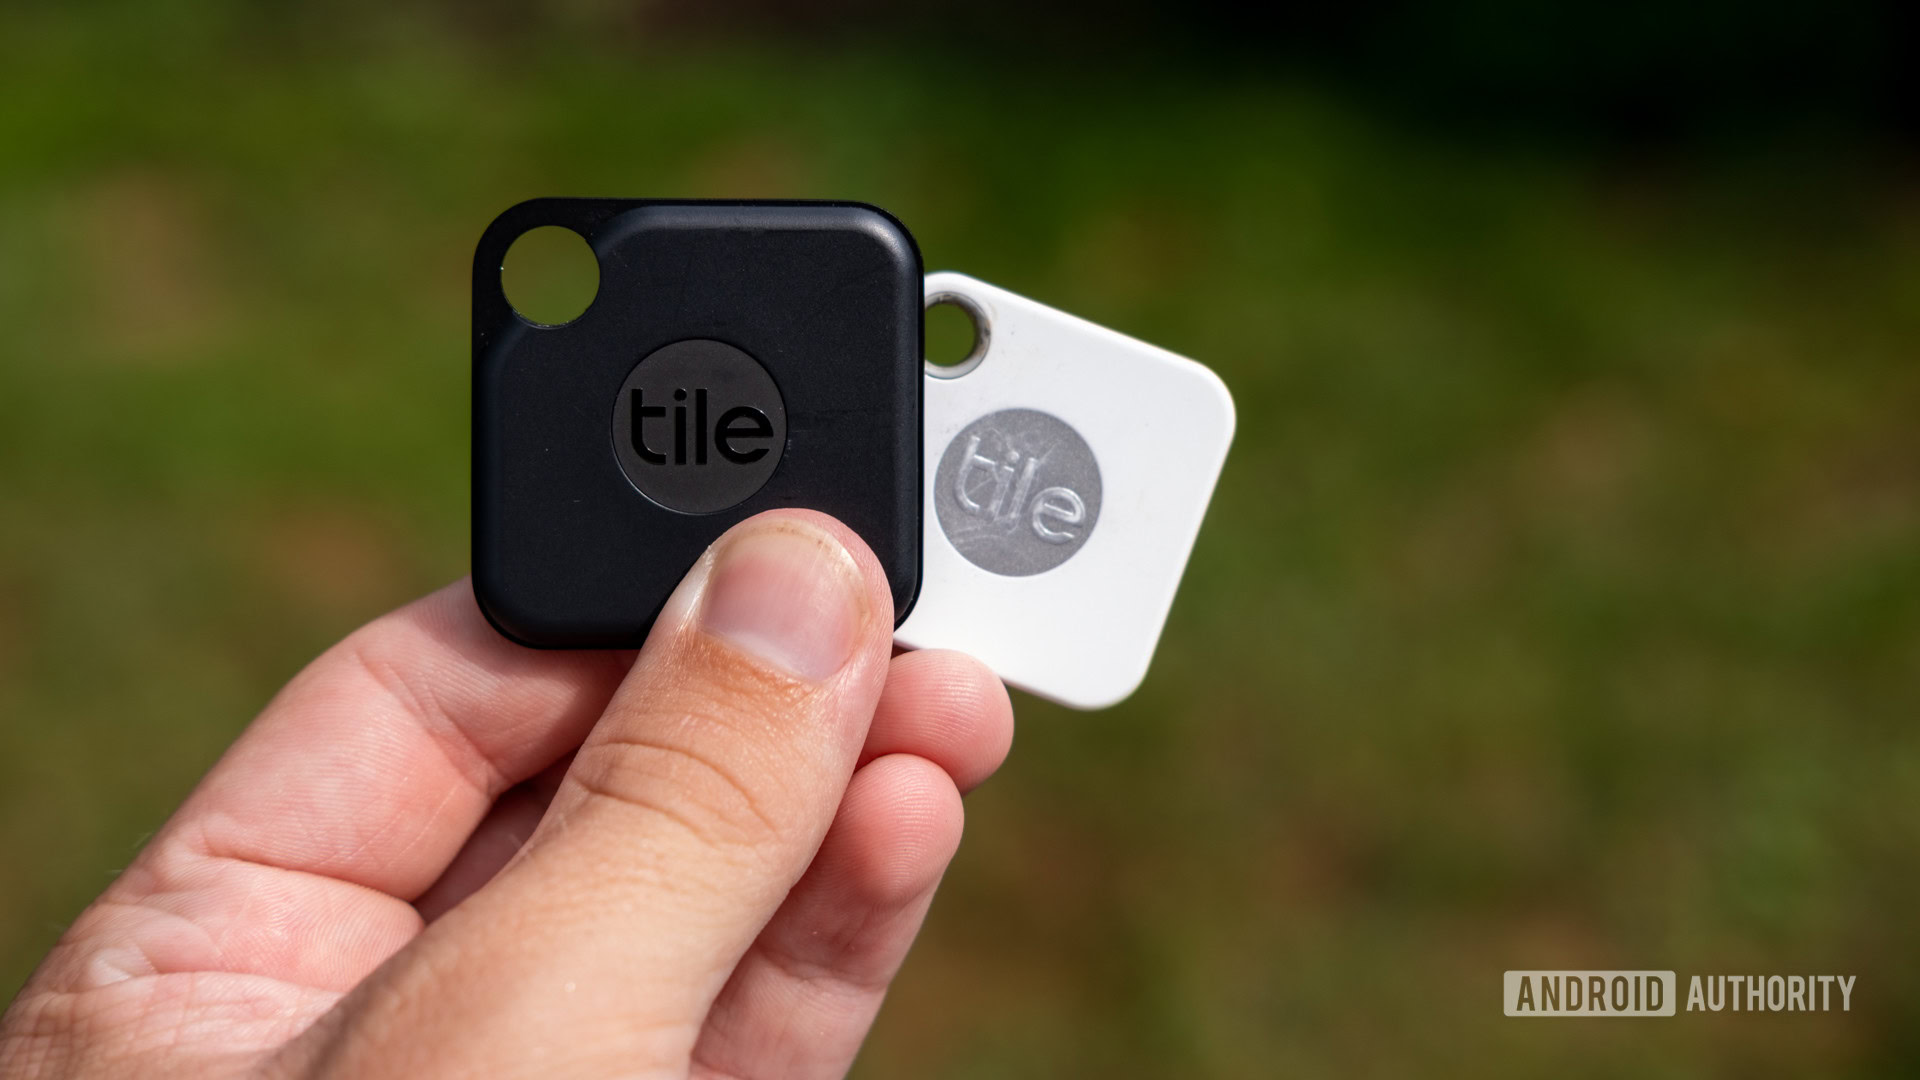 Tile Pro (2022) review: Bigger, but is it better? - Android Authority